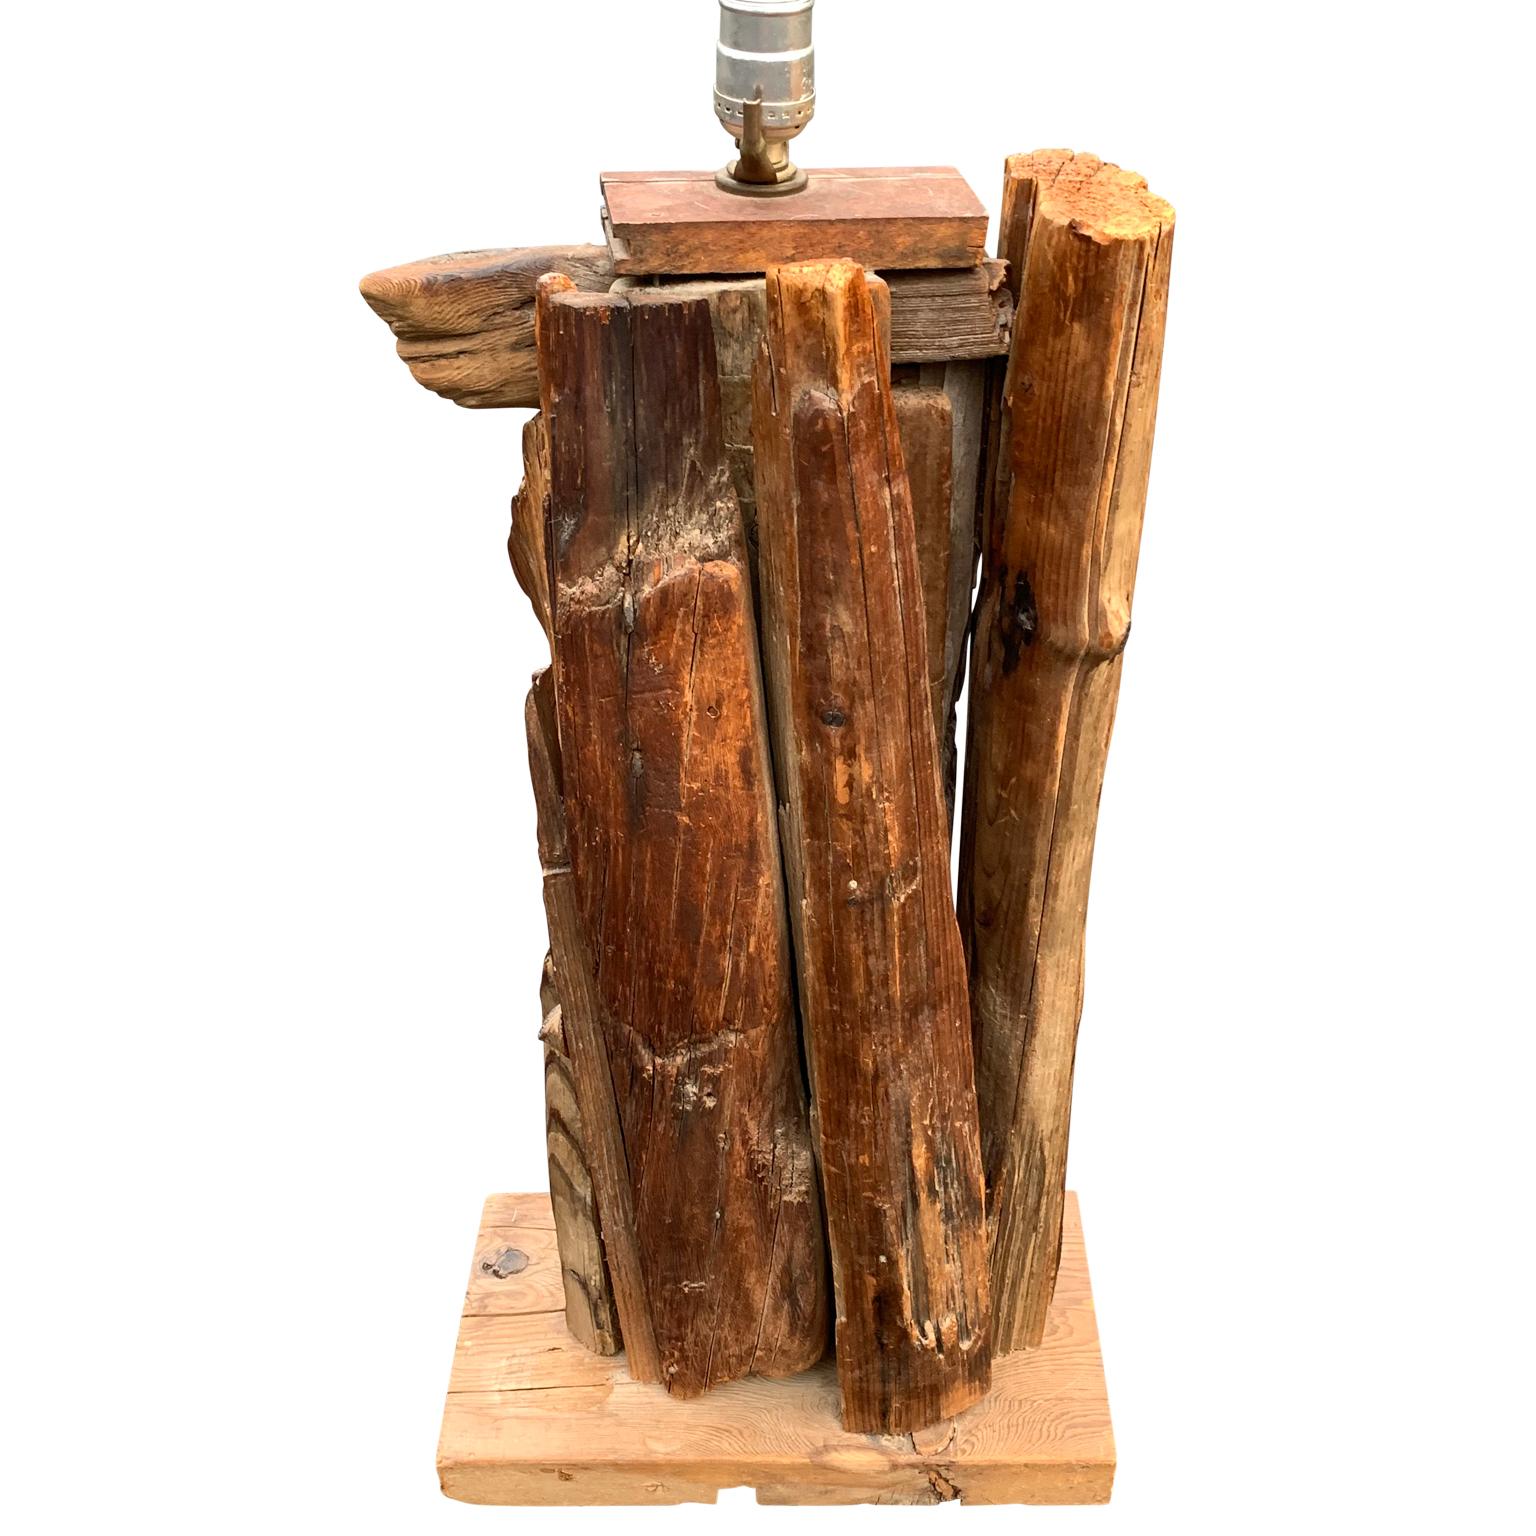 Large 1950s driftwood table lamp.
Harp and finial can be sourced if needed.